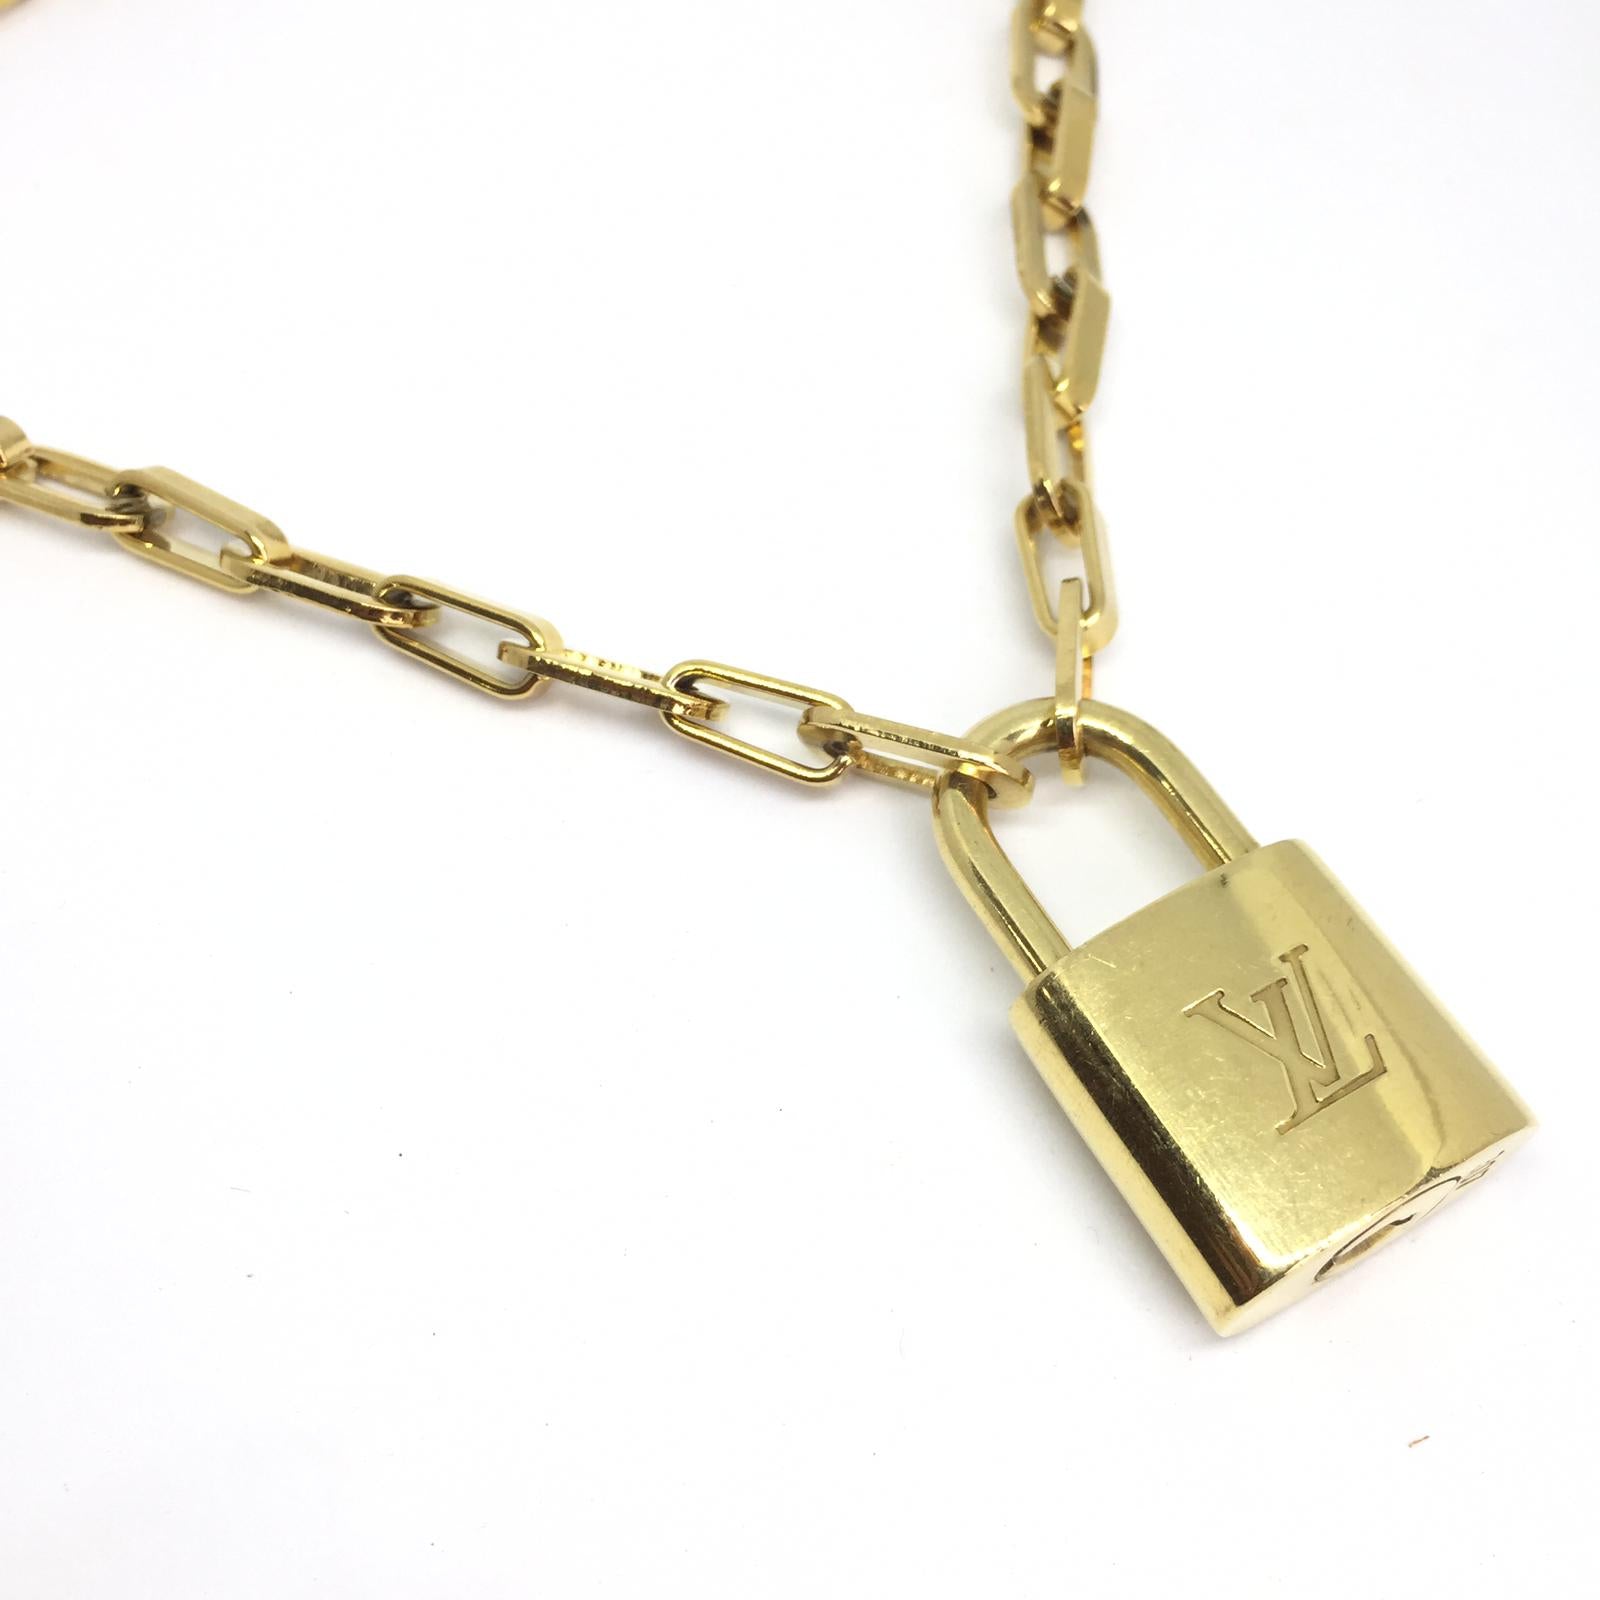 Auth Louis Vuitton Padlock Lock and Key #318 includes a non-brand necklace  chain